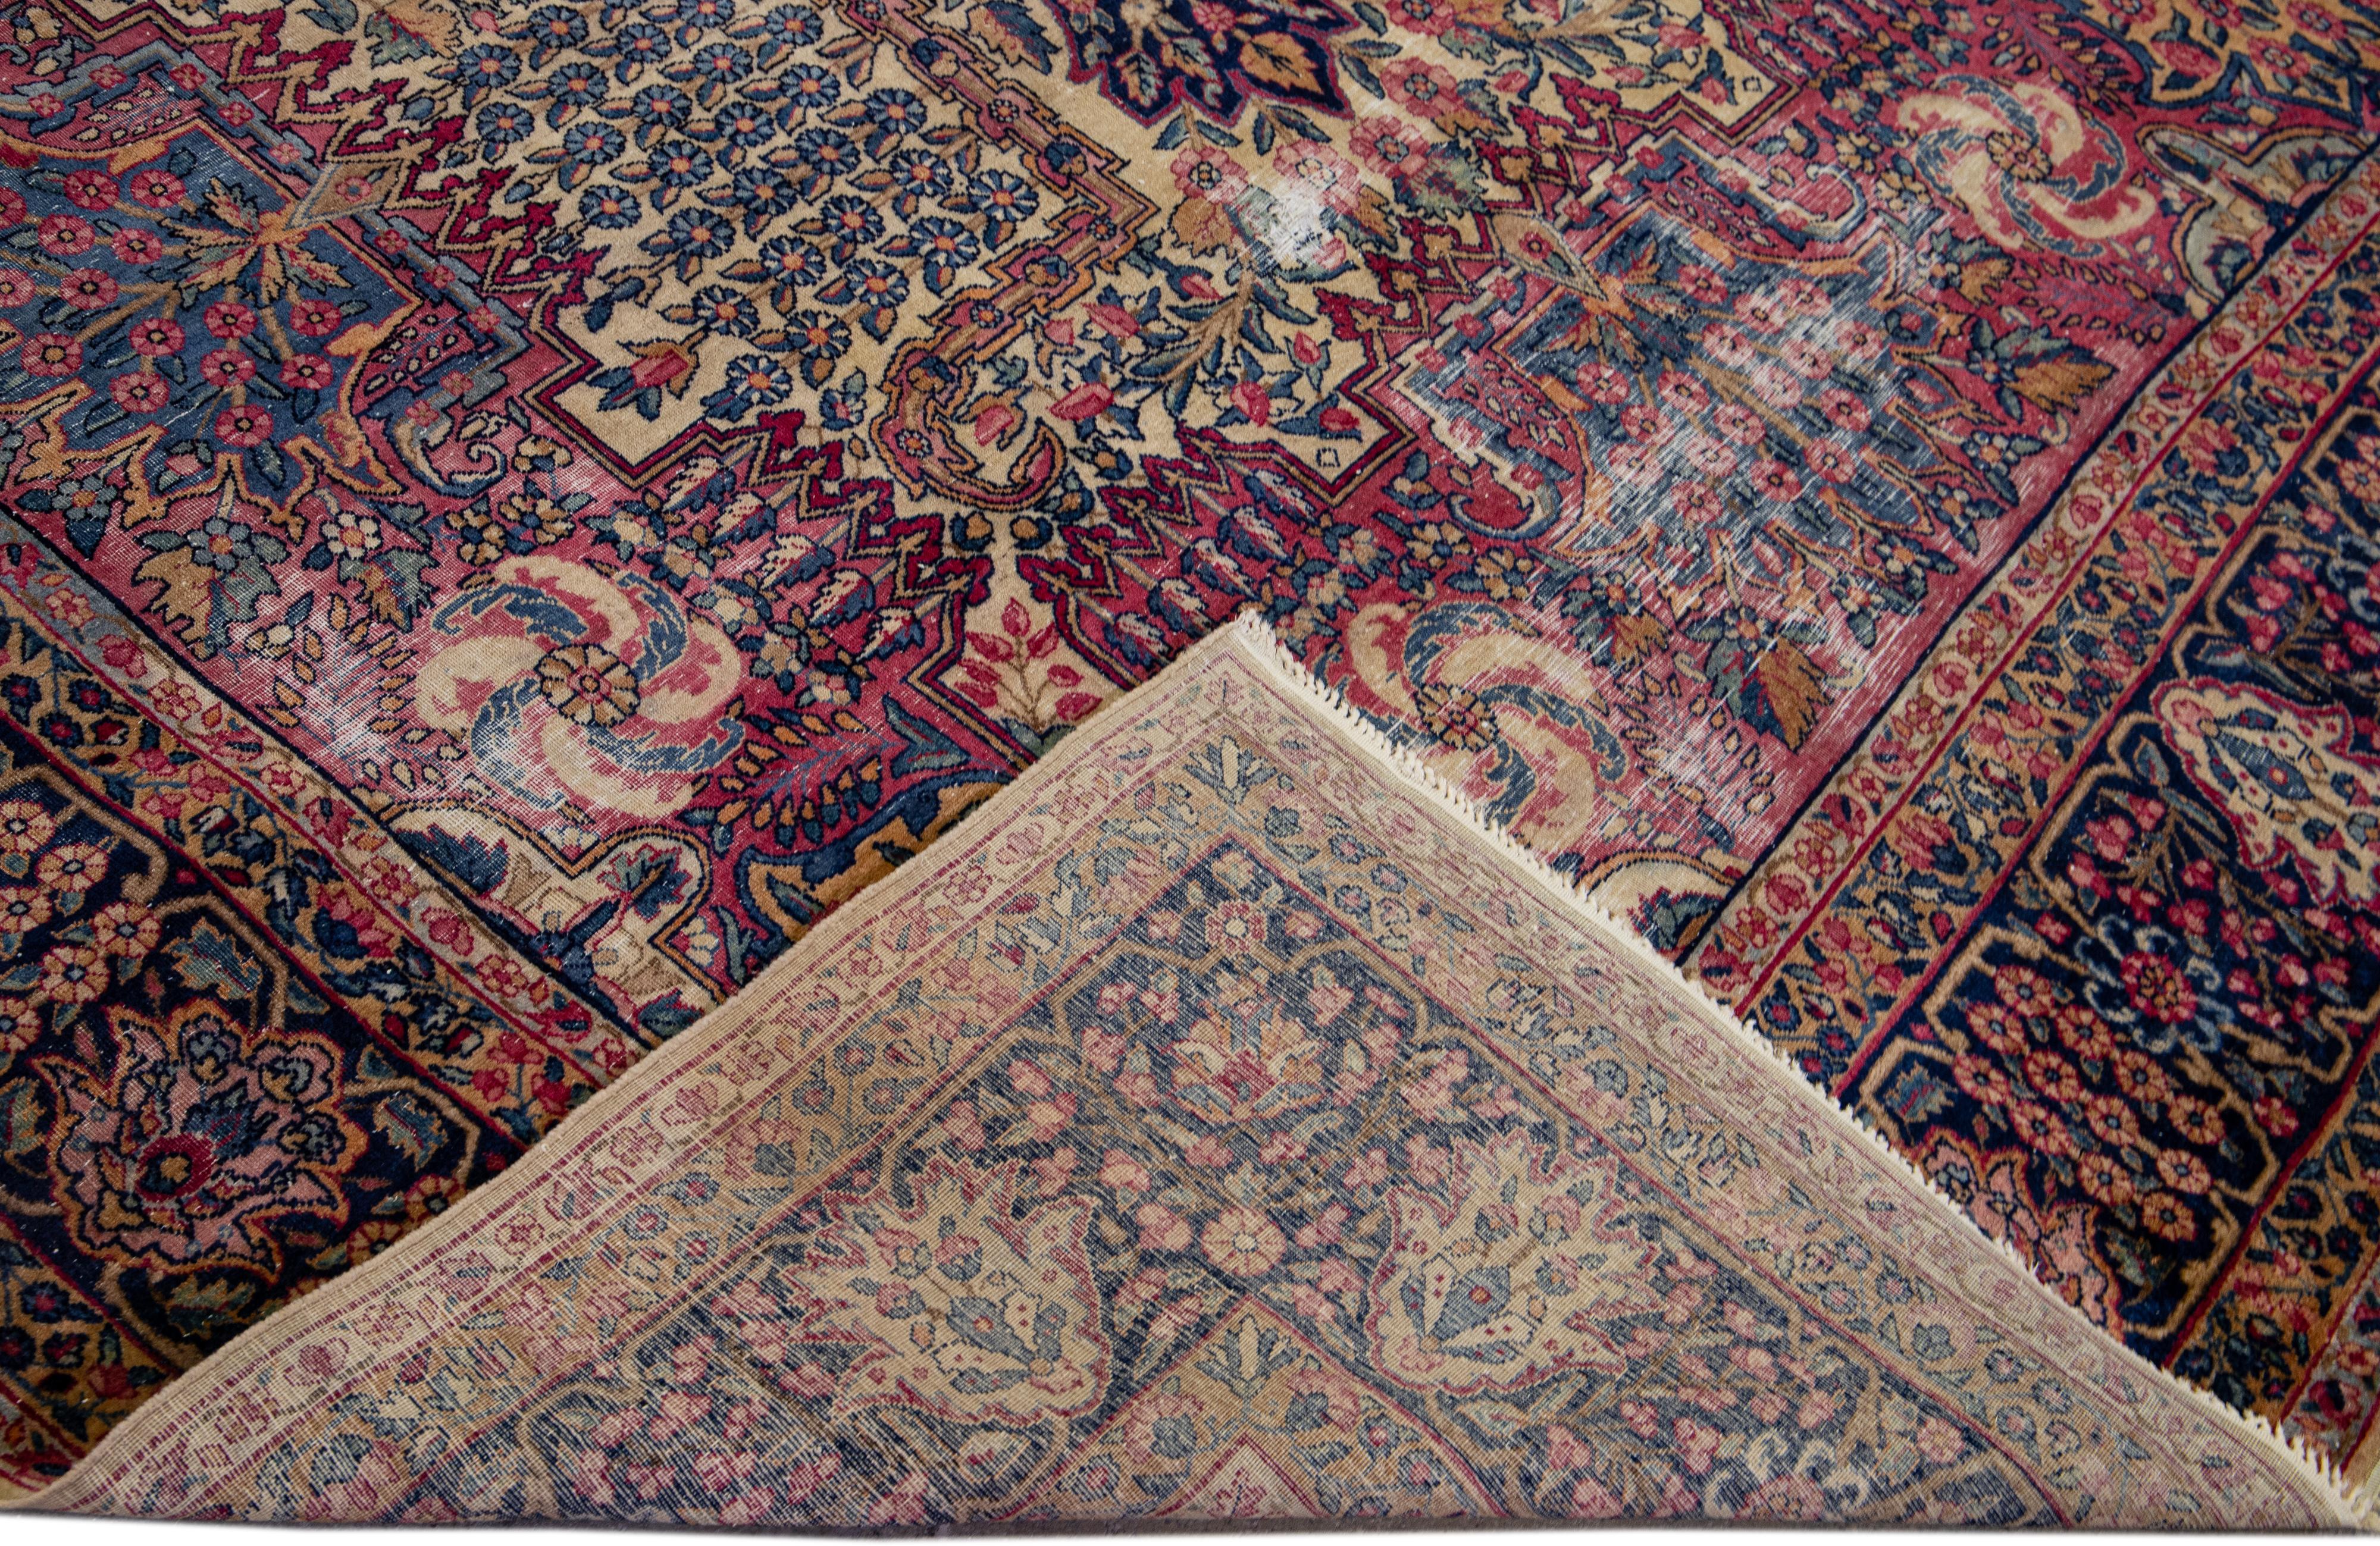 Beautiful antique Kerman hand-knotted wool rug with a pink and beige field. This Persian rug has a blue frame and multi-color accents in a gorgeous all-over geometric medallion floral design.

This rug measures: 8'9